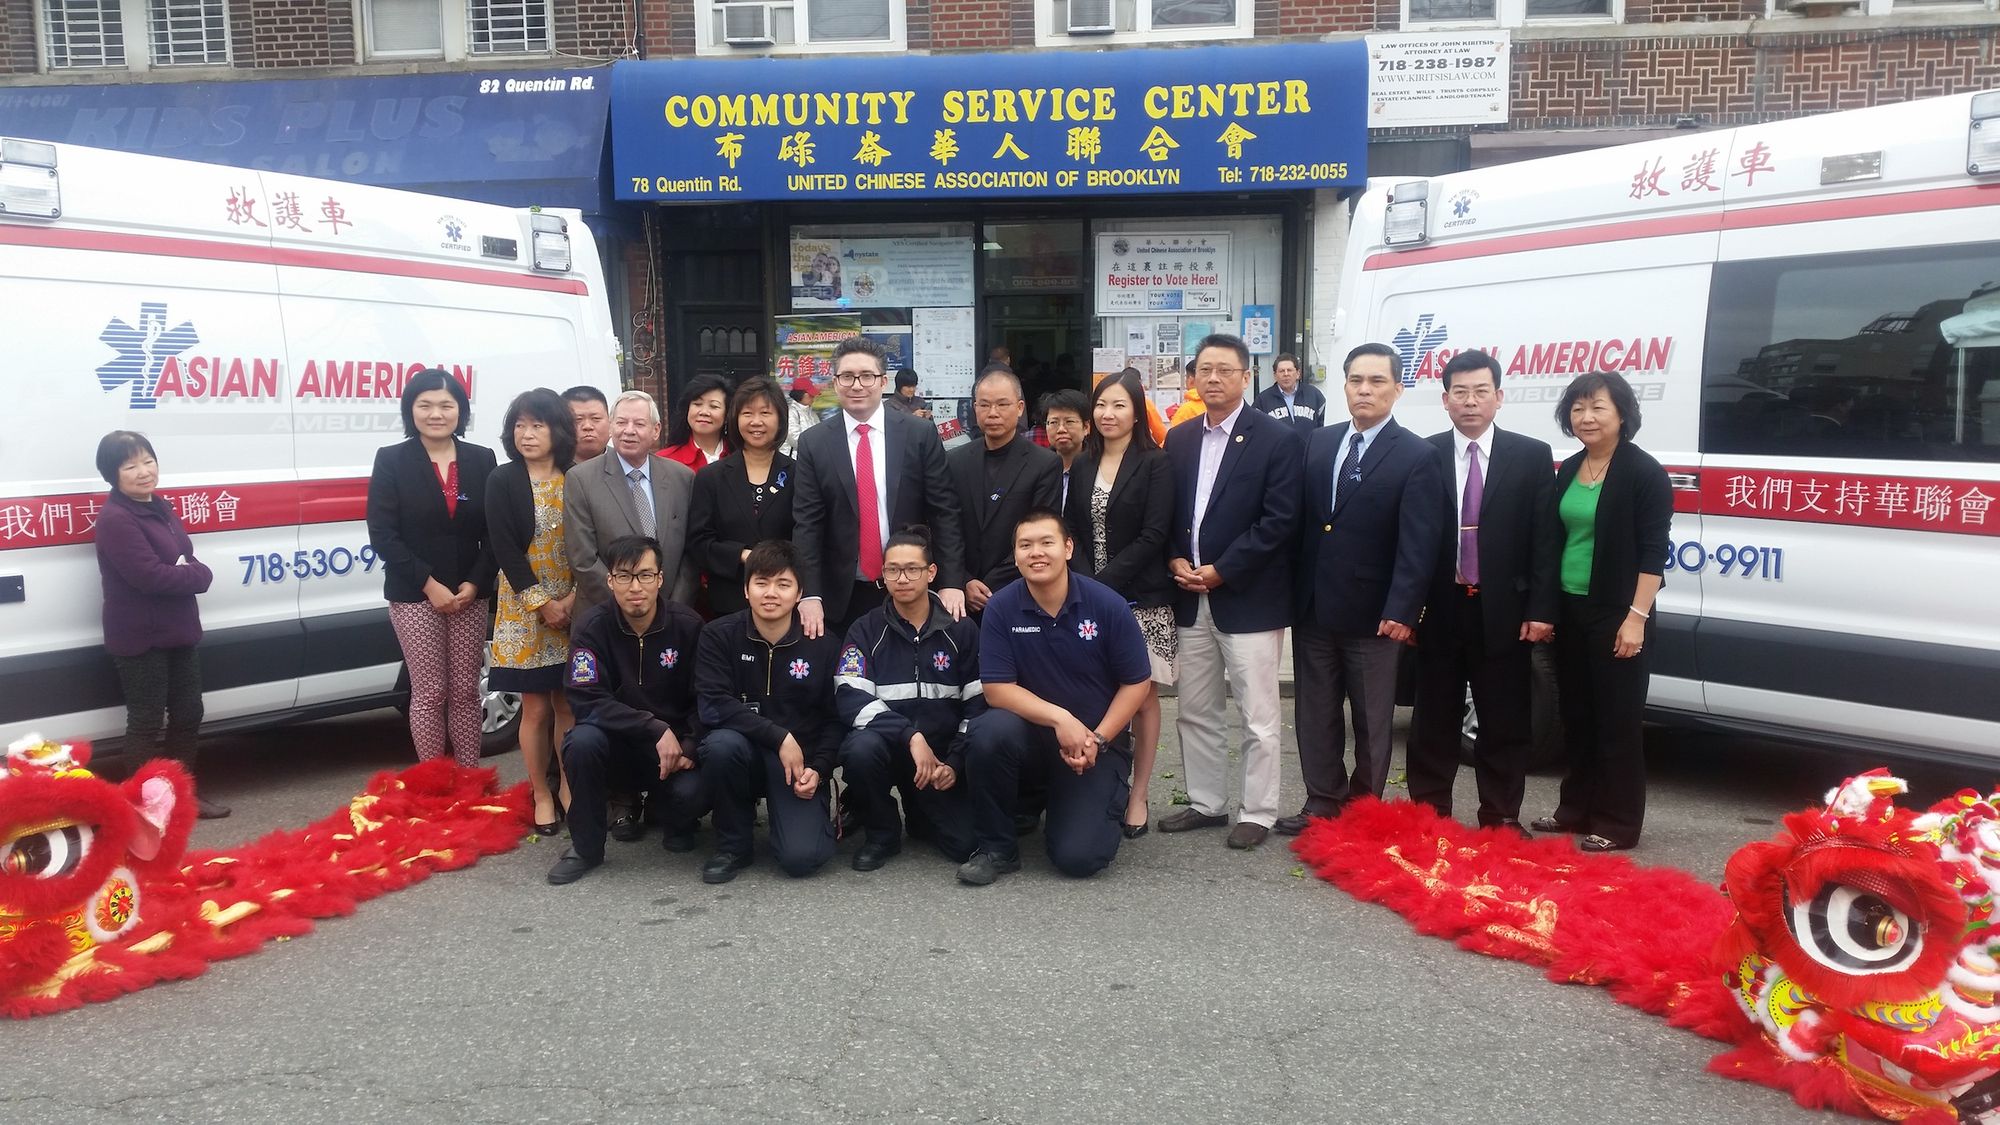 New Ambulance Service To Provide Chinese Language Health Care And Jobs To Brooklynites